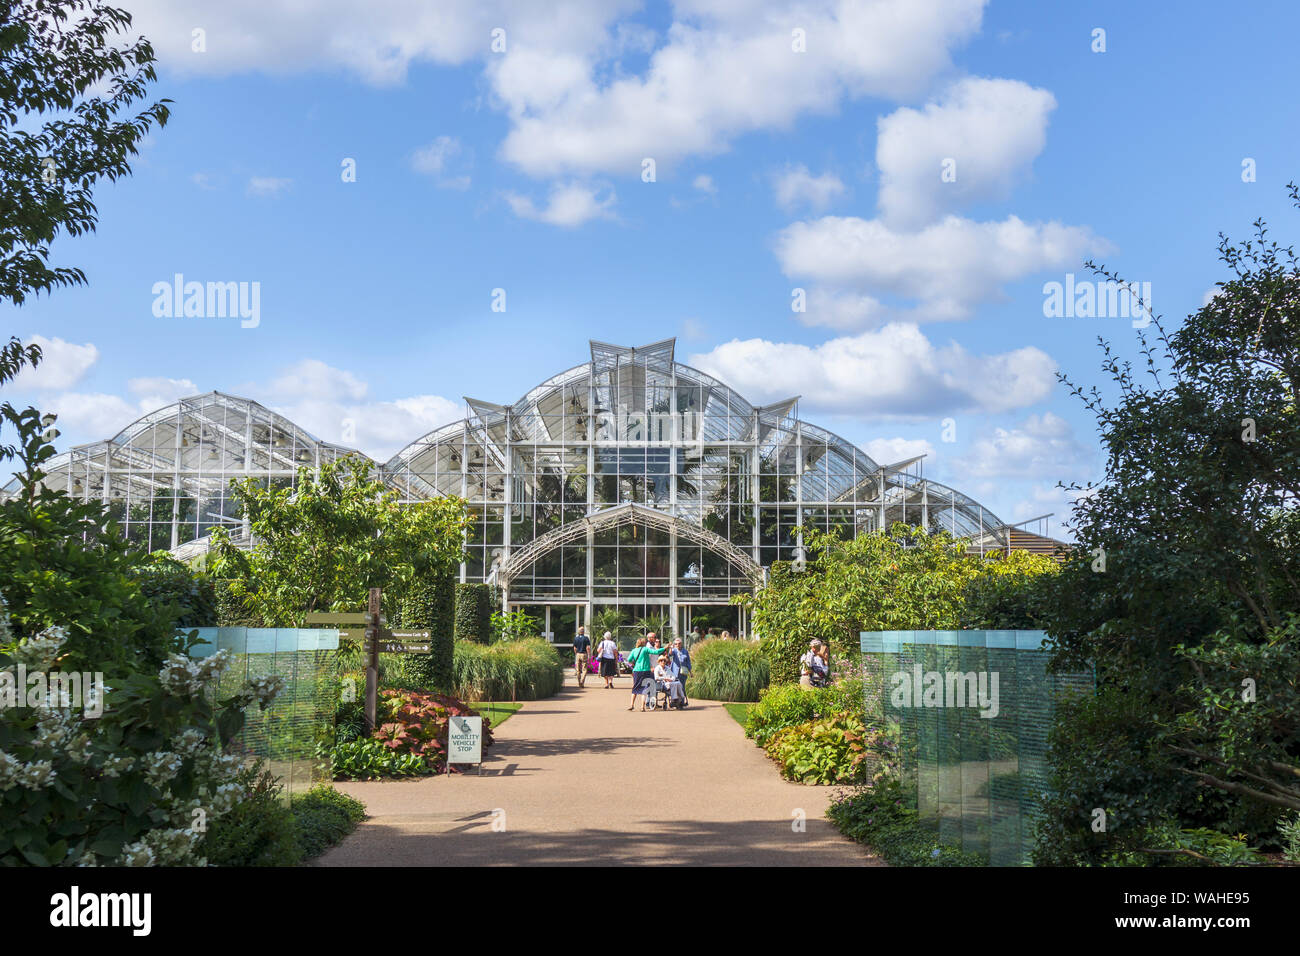 View of the exterior of the iconic Glasshouse at RHS Garden, Wisley, Surrey, southeast England on a sunny day in summer Stock Photo